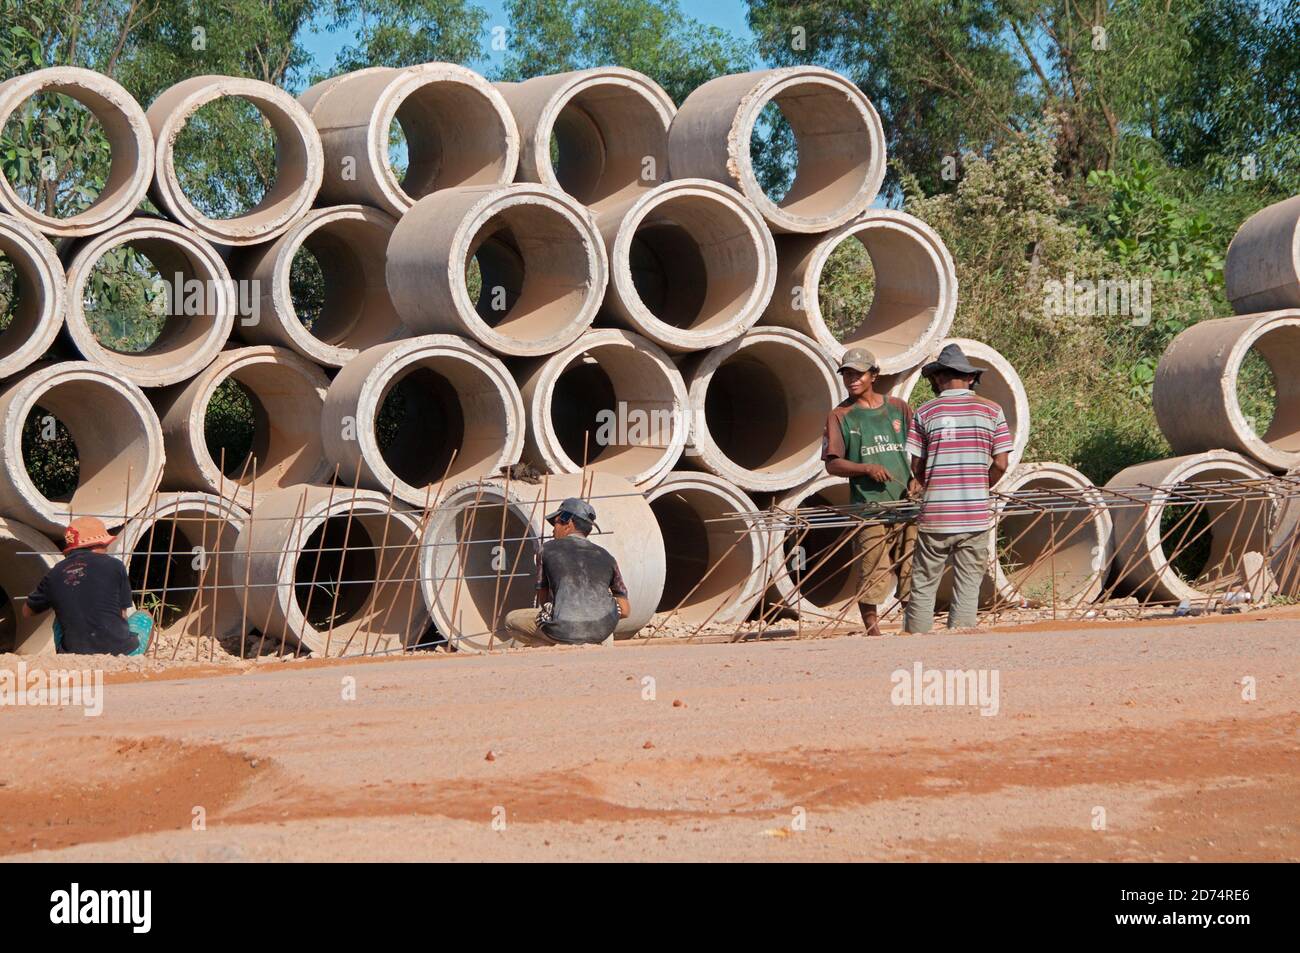 Sihanoukville, Cambodia - 30th December 2018 : View of a cambodian road construction site with workers on the street and many drainage concrete pipes Stock Photo